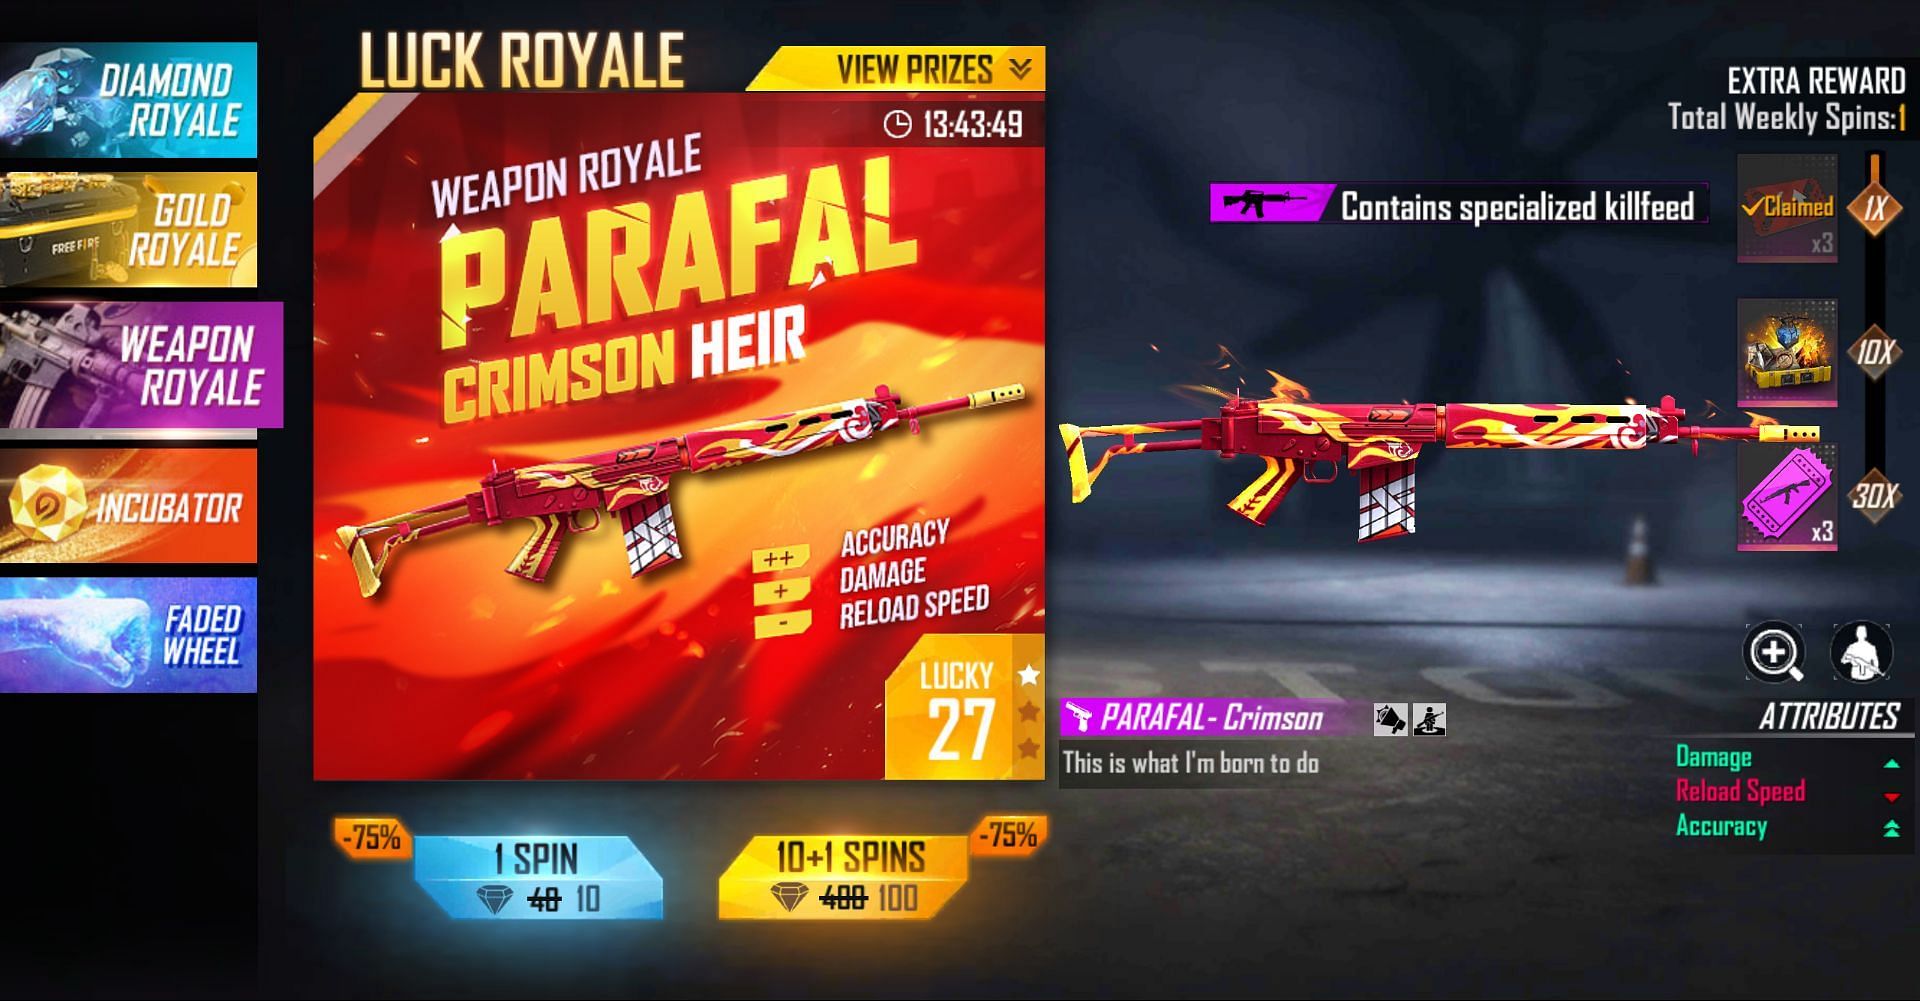 A single spin is priced at 10 diamonds (Image via Free Fire)